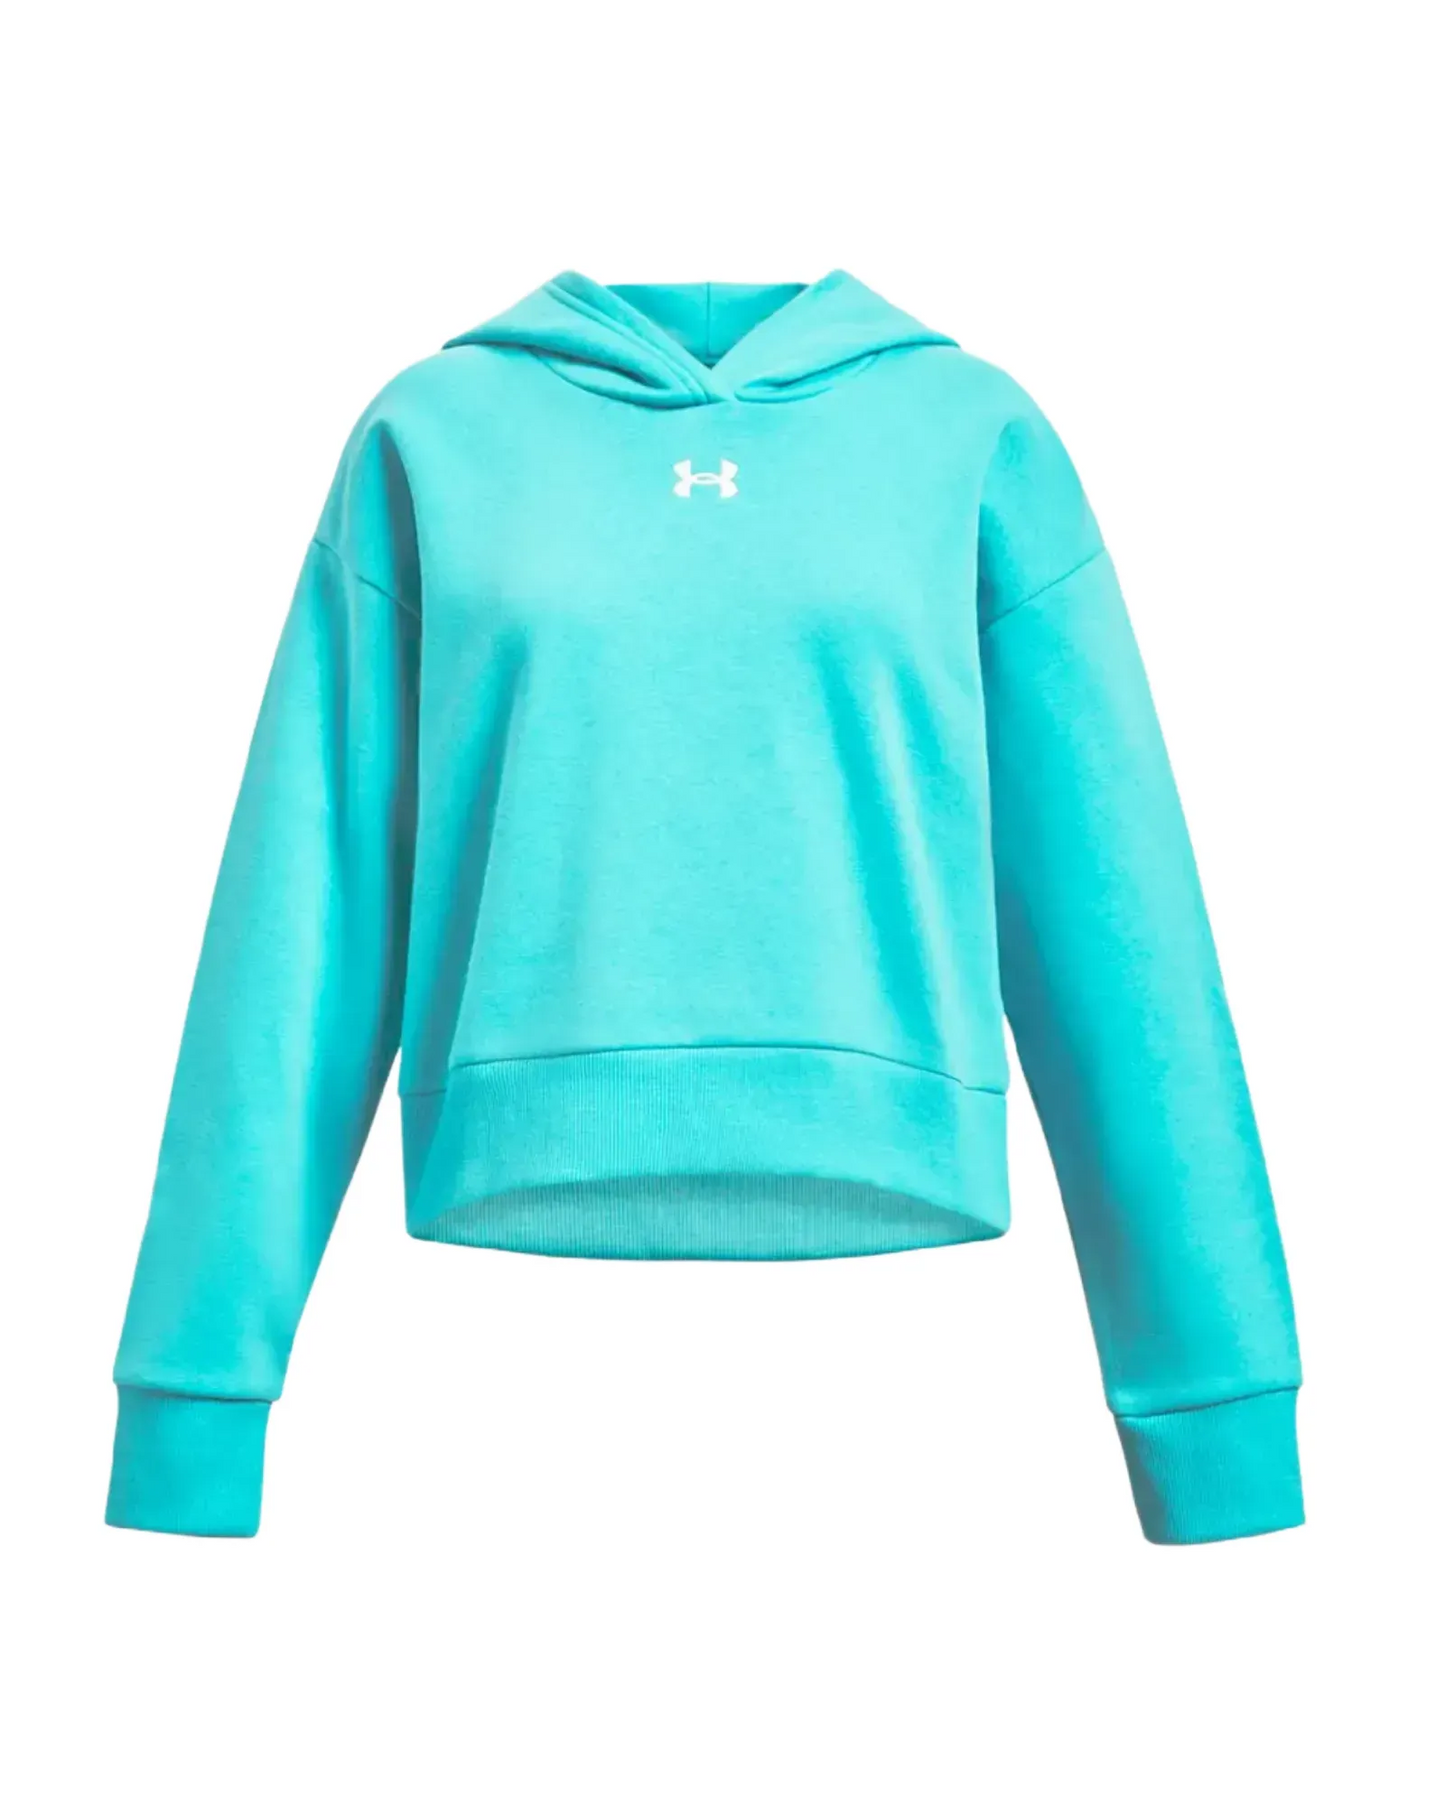 Cagoule turquoise - Under Armour